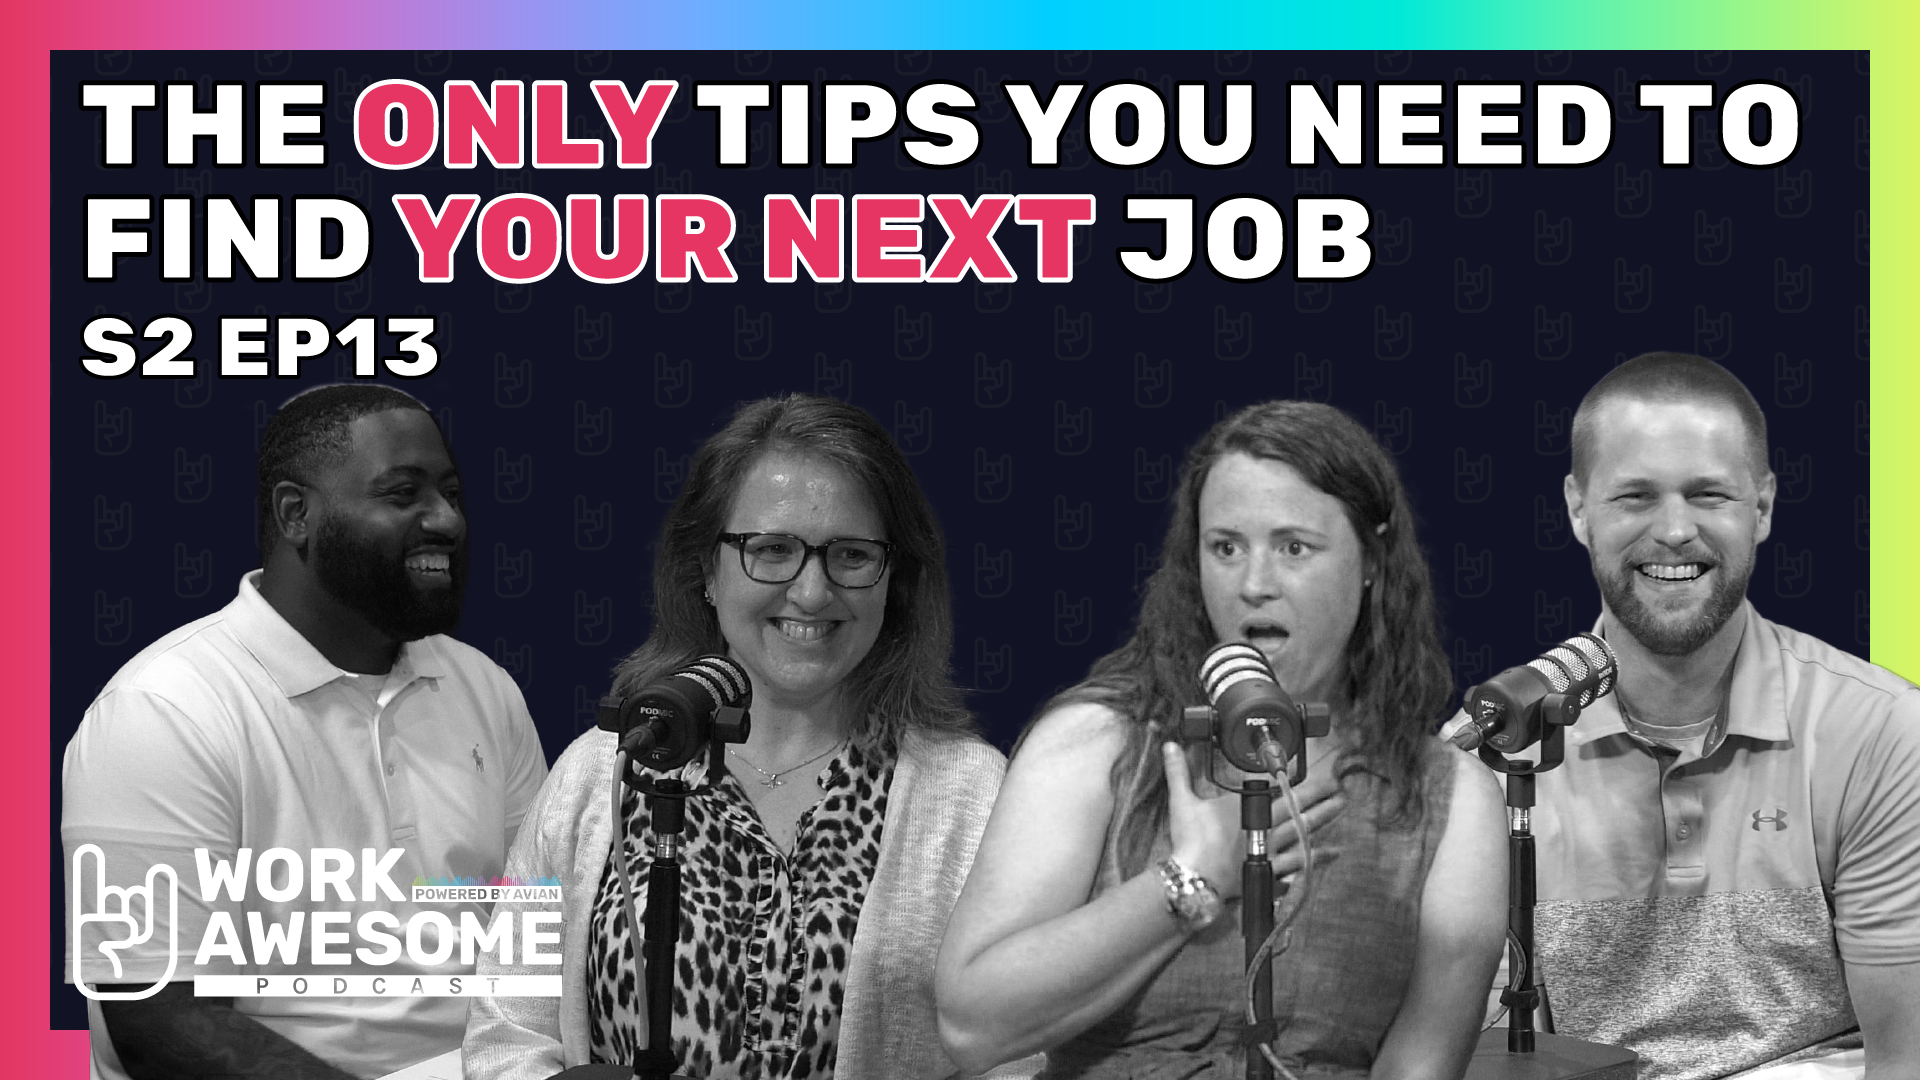 The Only Tips You Need to Find Your Next Job